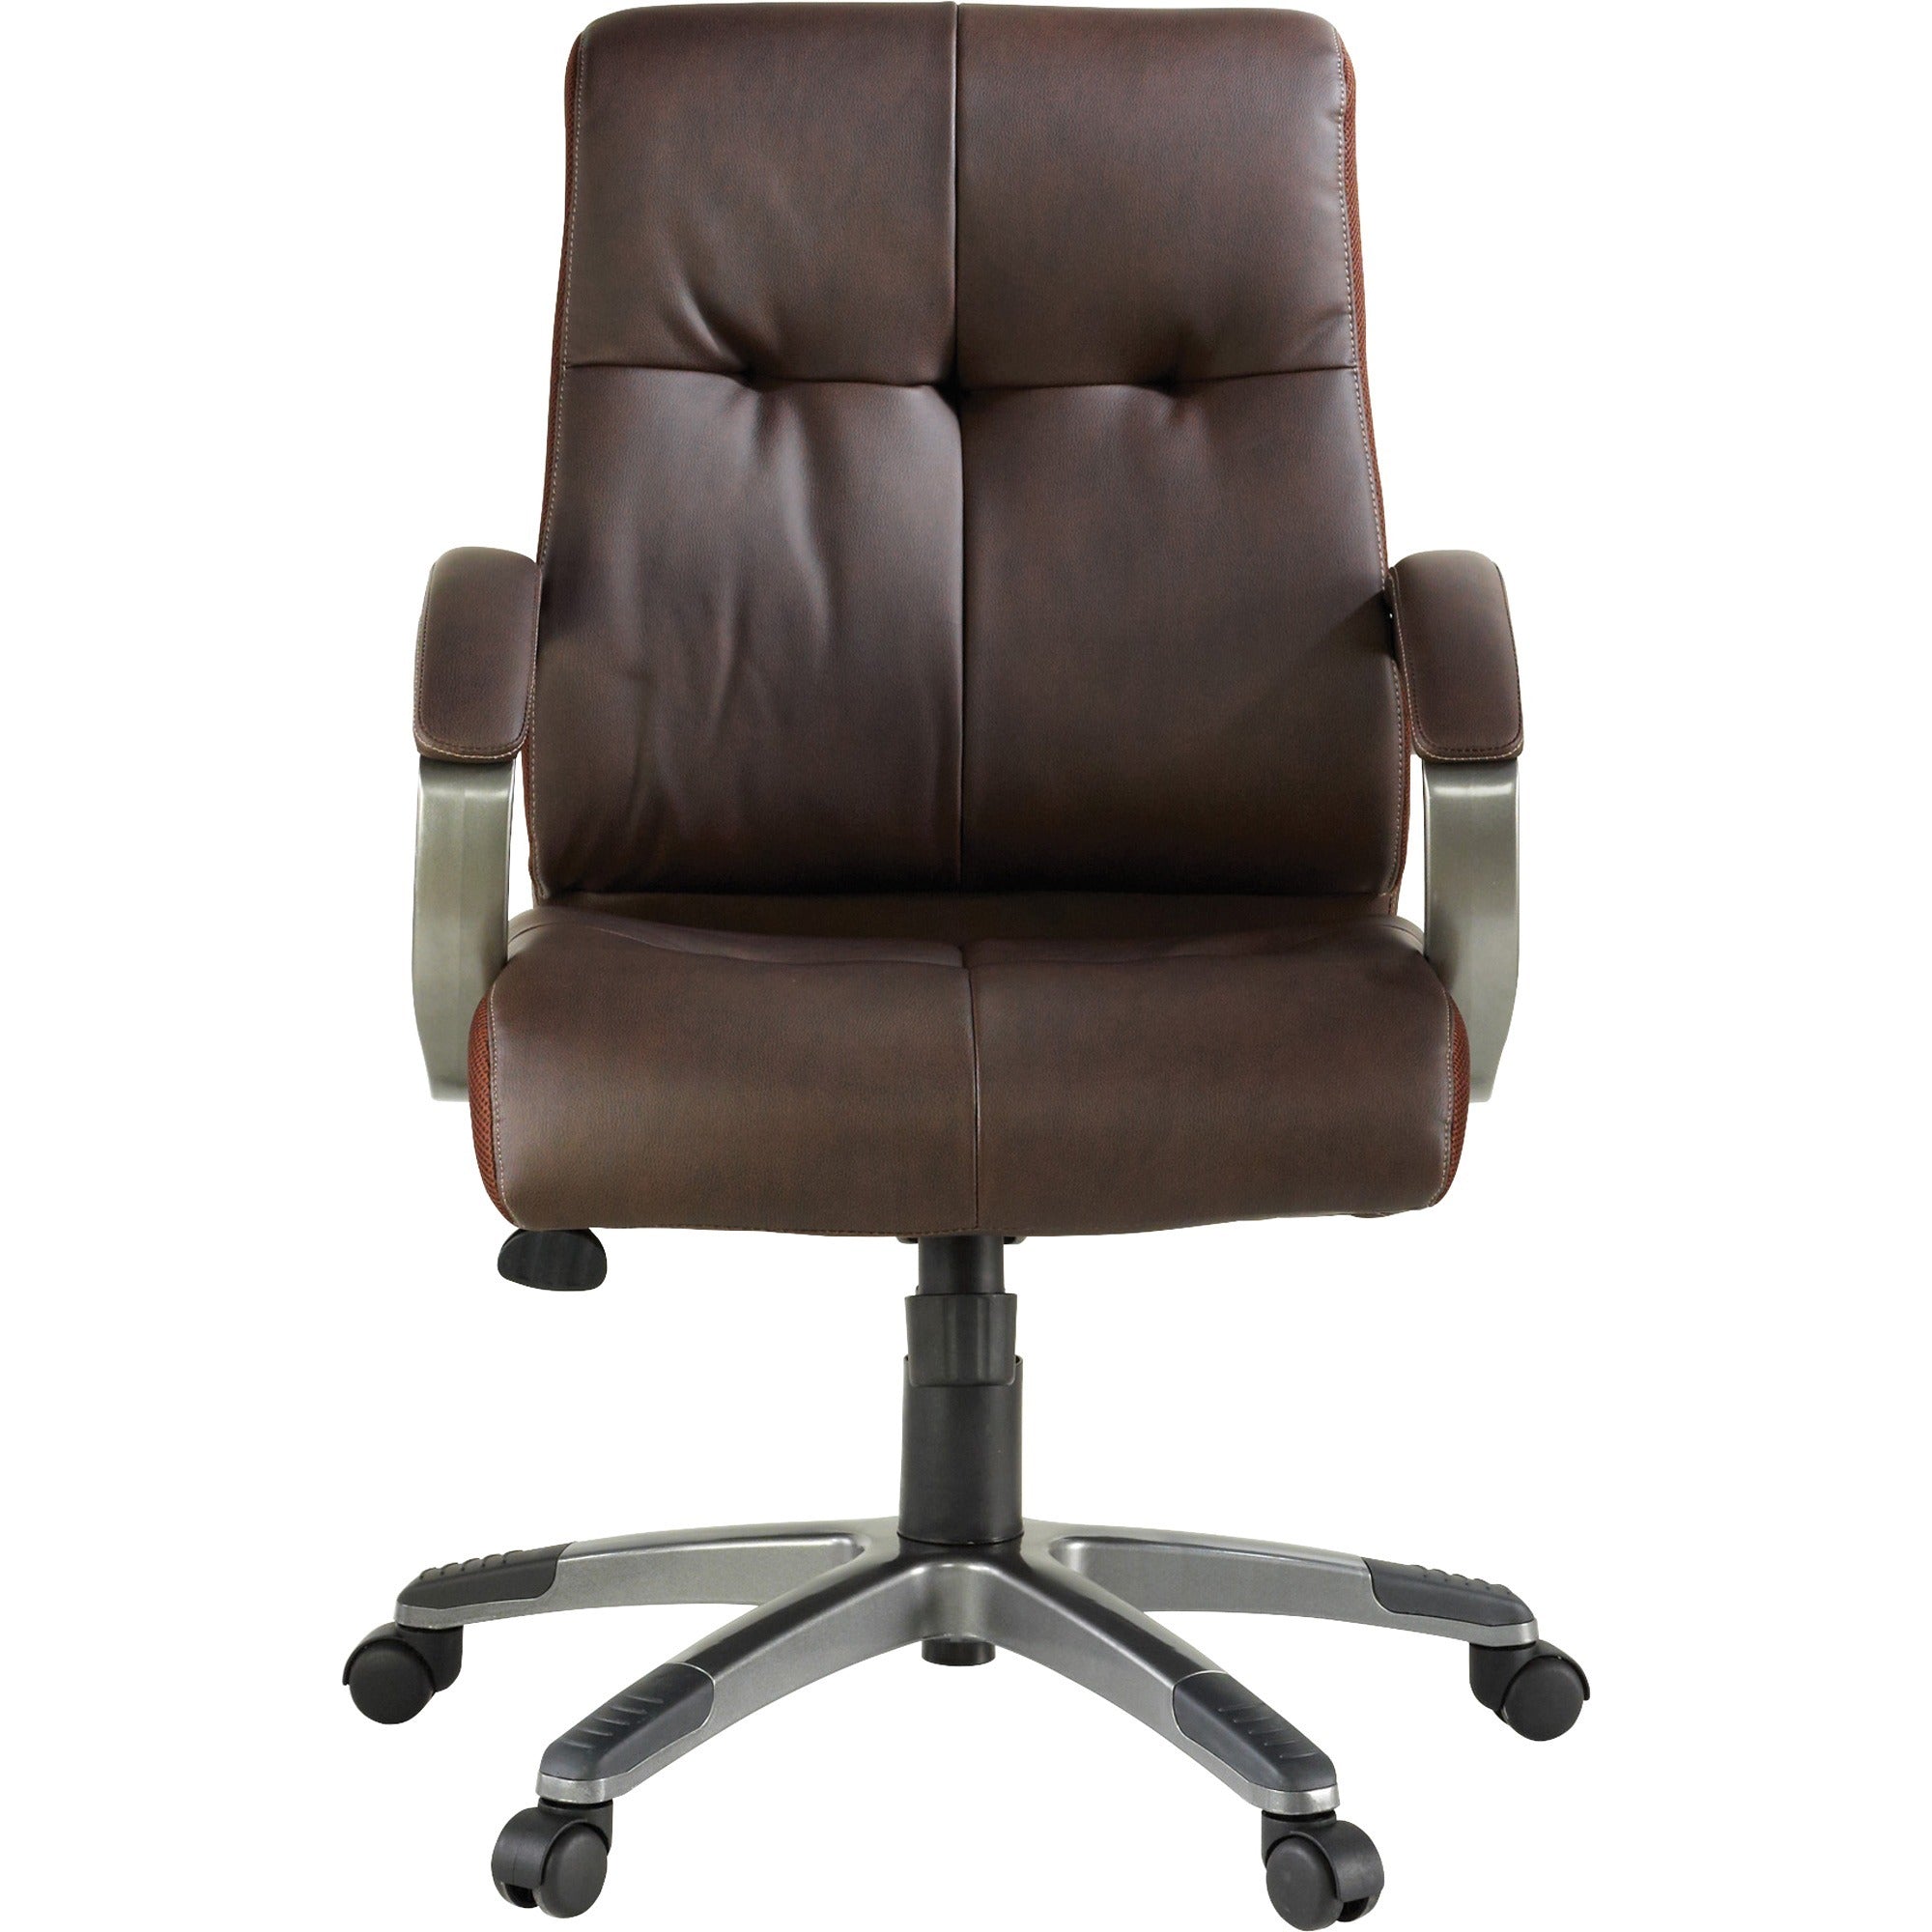 Lorell Low-back Executive Office Chair - Brown Leather Seat - 5-star Base - Brown - 1 Each - 